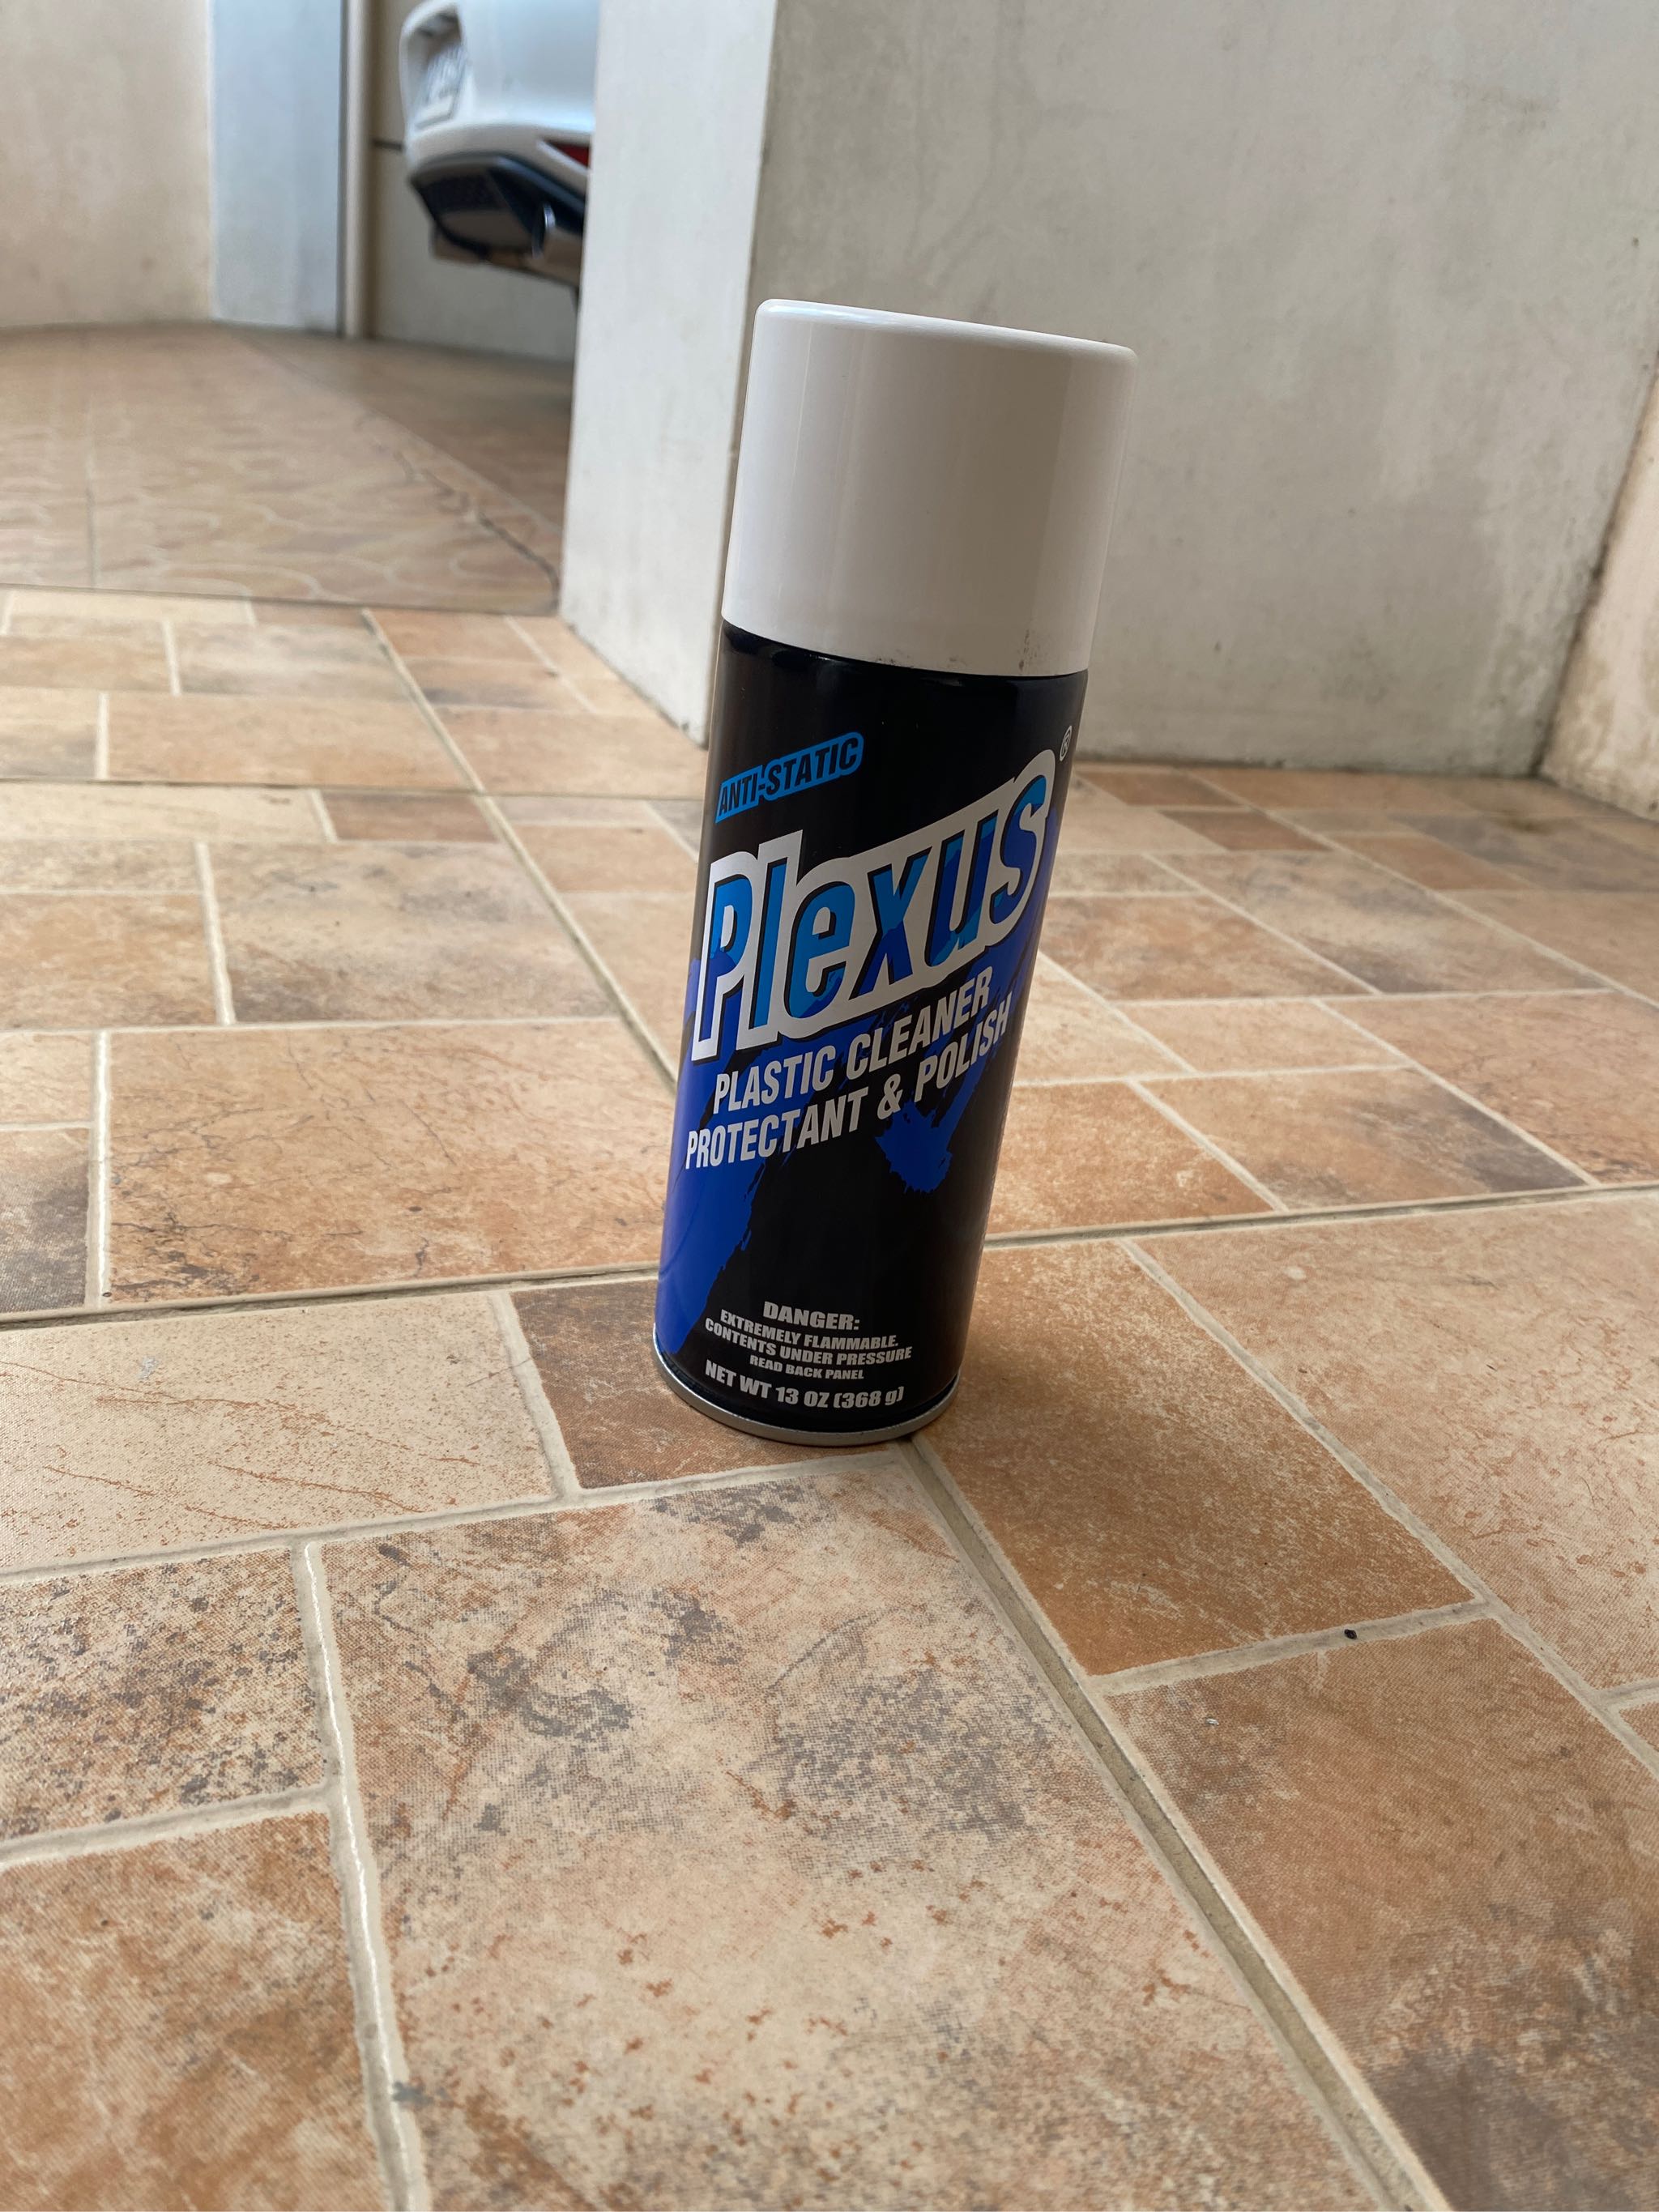 13 oz Plexus Plastic Cleaner Protectant and Polish Anti-Static - 20214 -  NEW! for sale online